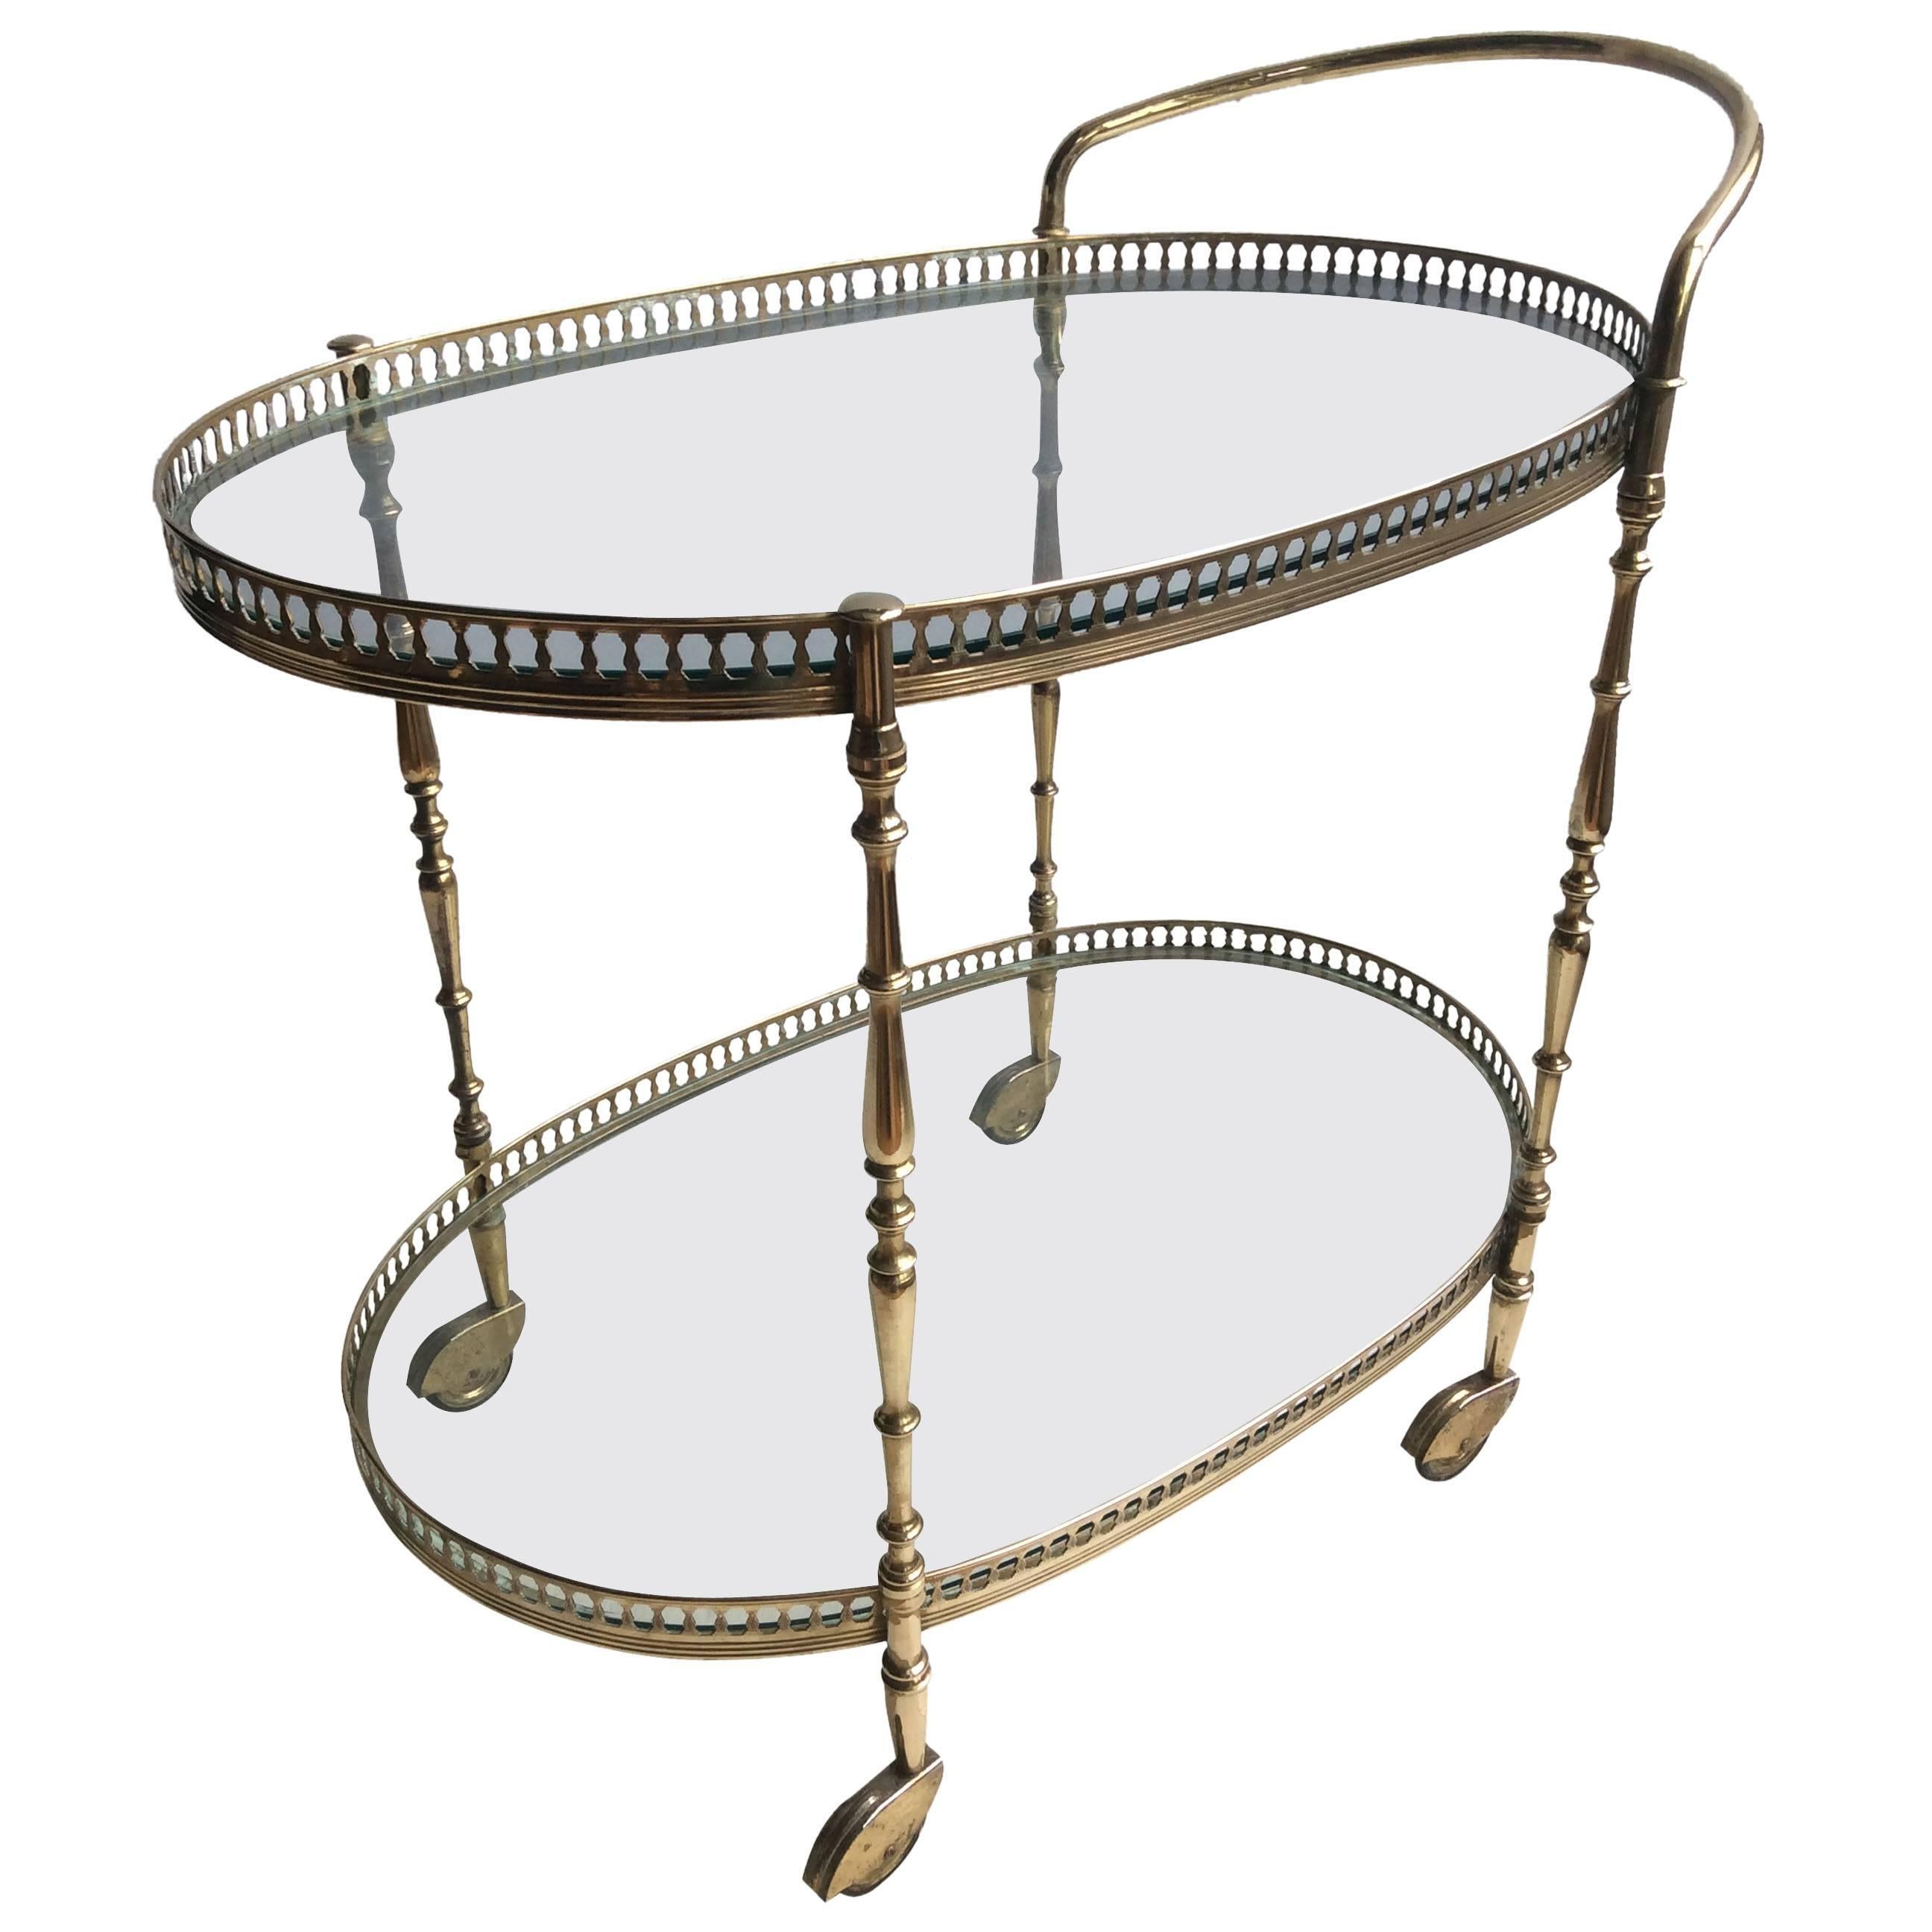 Vintage French Brass Oval Drinks Trolley / Bar Cart